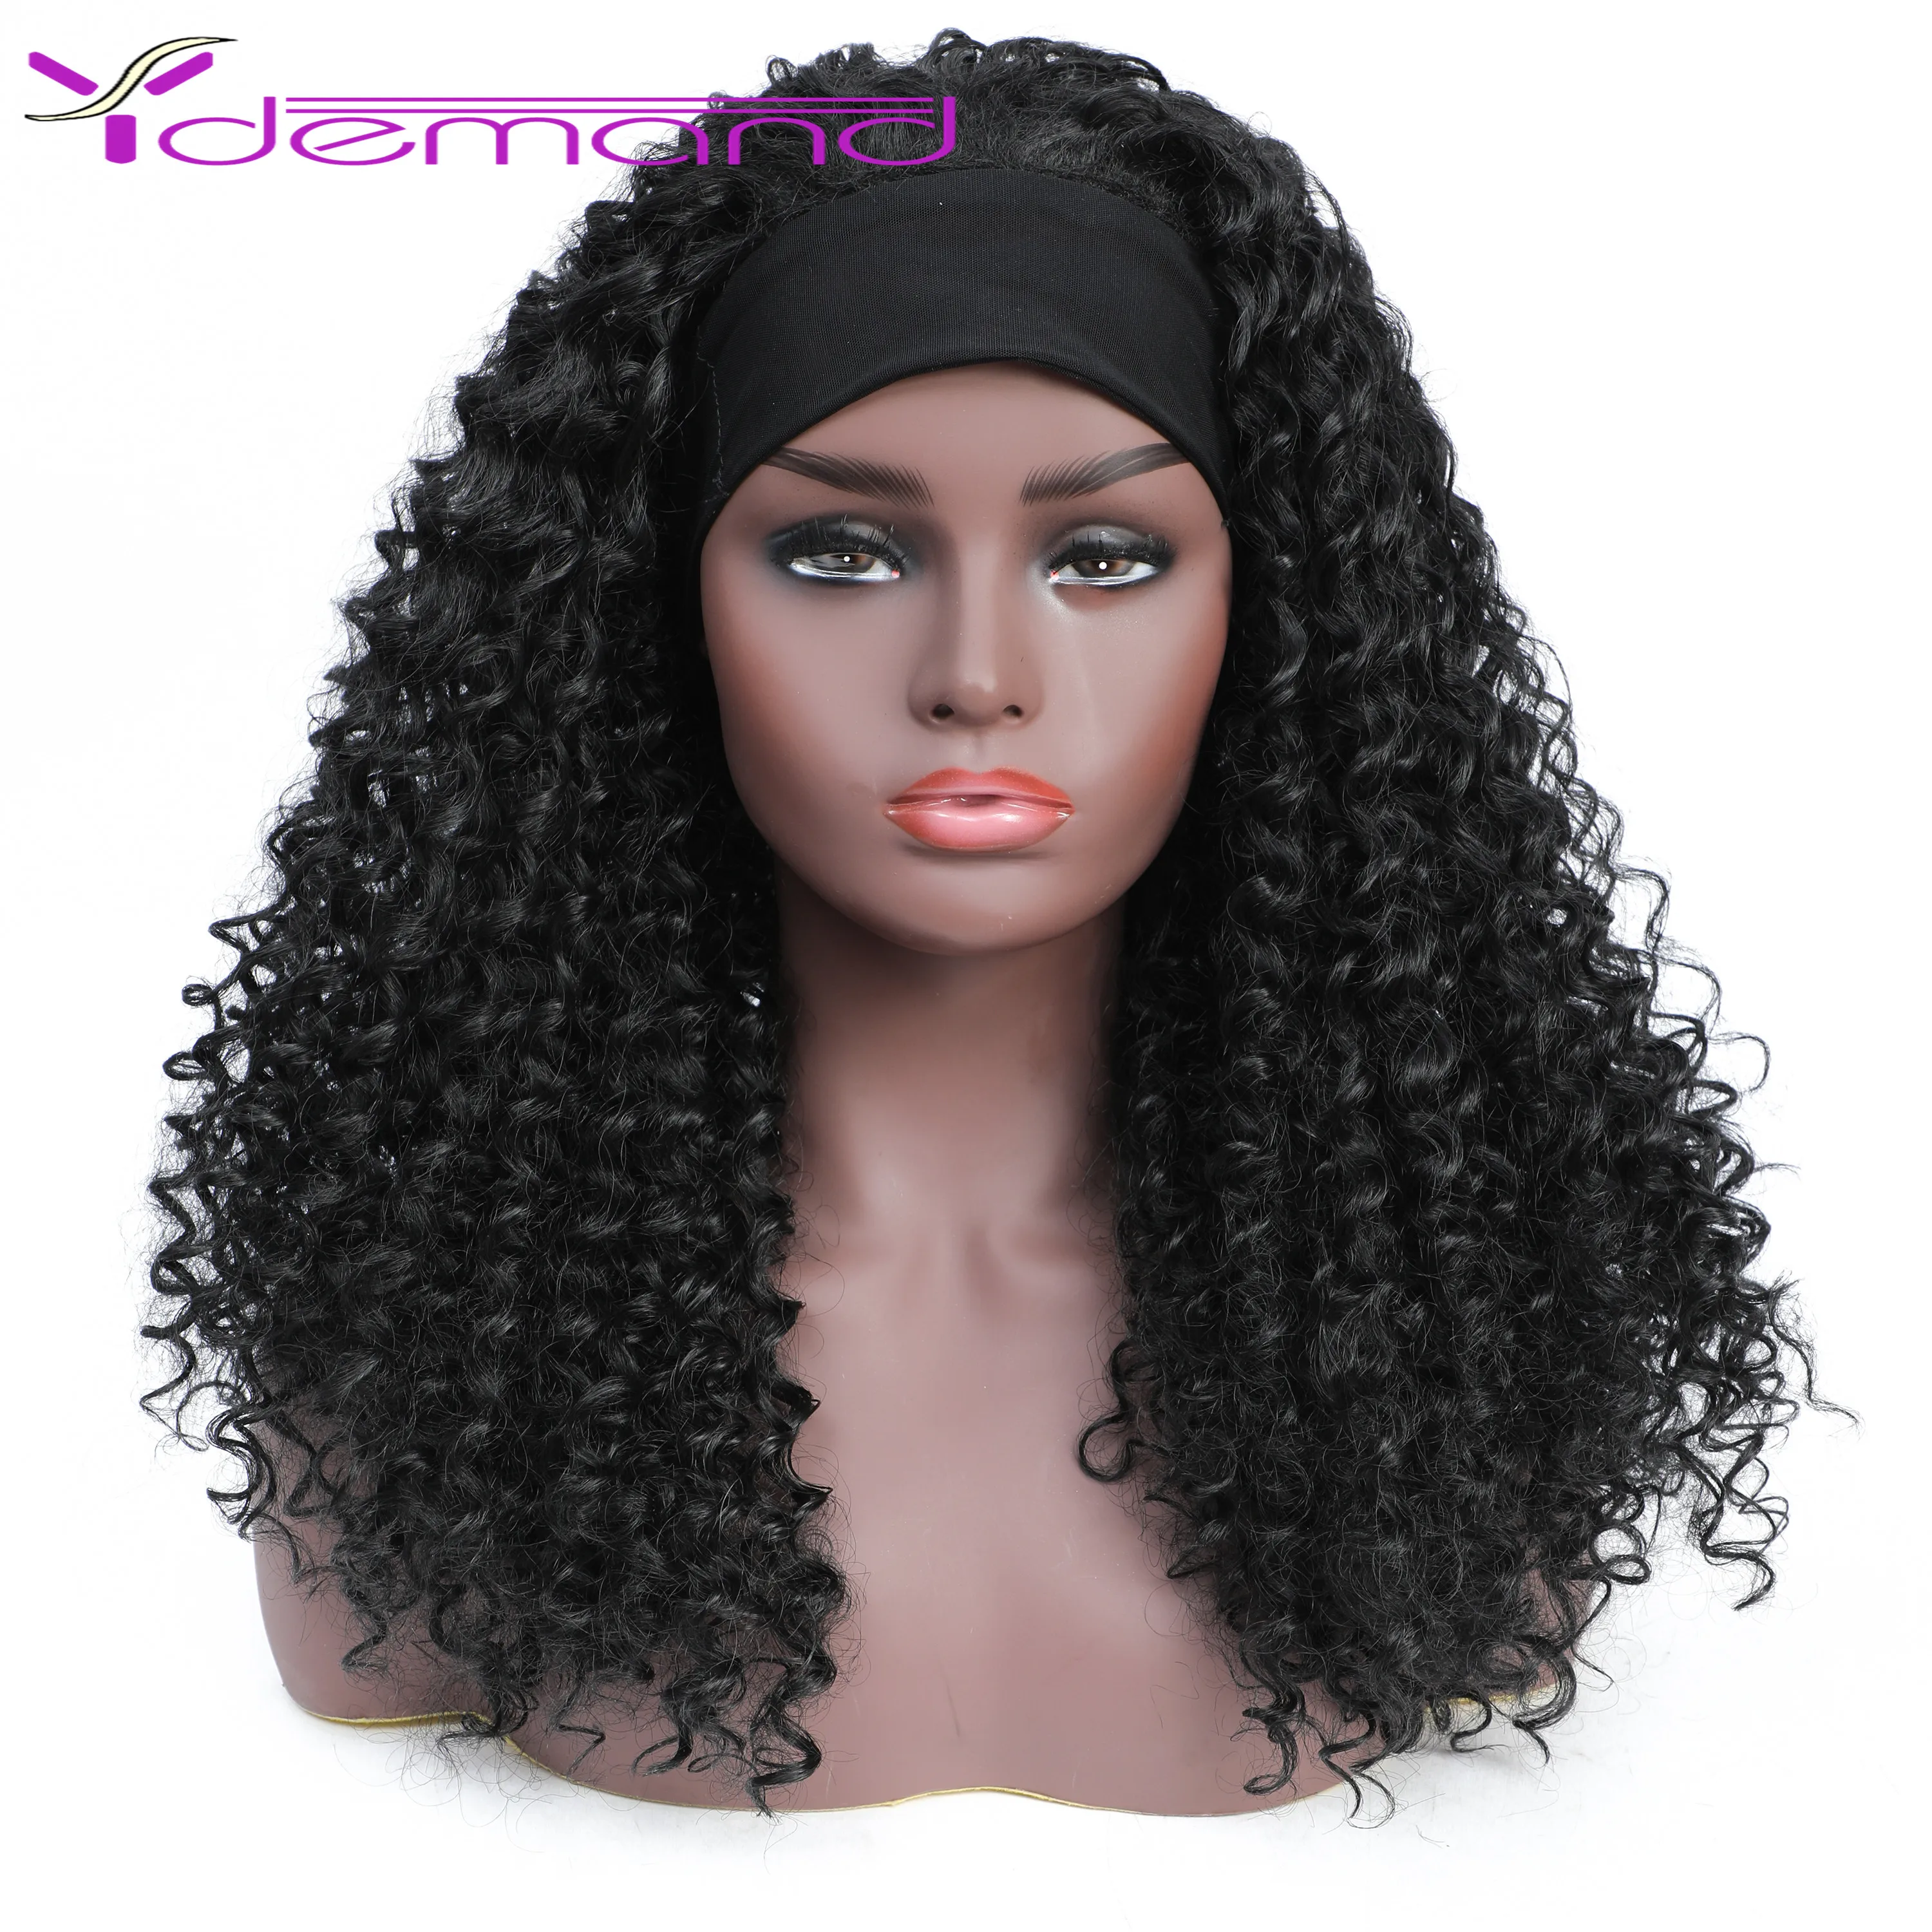 Y Demand Kinky Curly Wig 18inch Long Synthetic Hair Wig For Negro Women Kinky Curly Headband Wig Affordable Natural Hair Wig carlos vaso de azul y negro innovatehs019 cd musica 1 cd